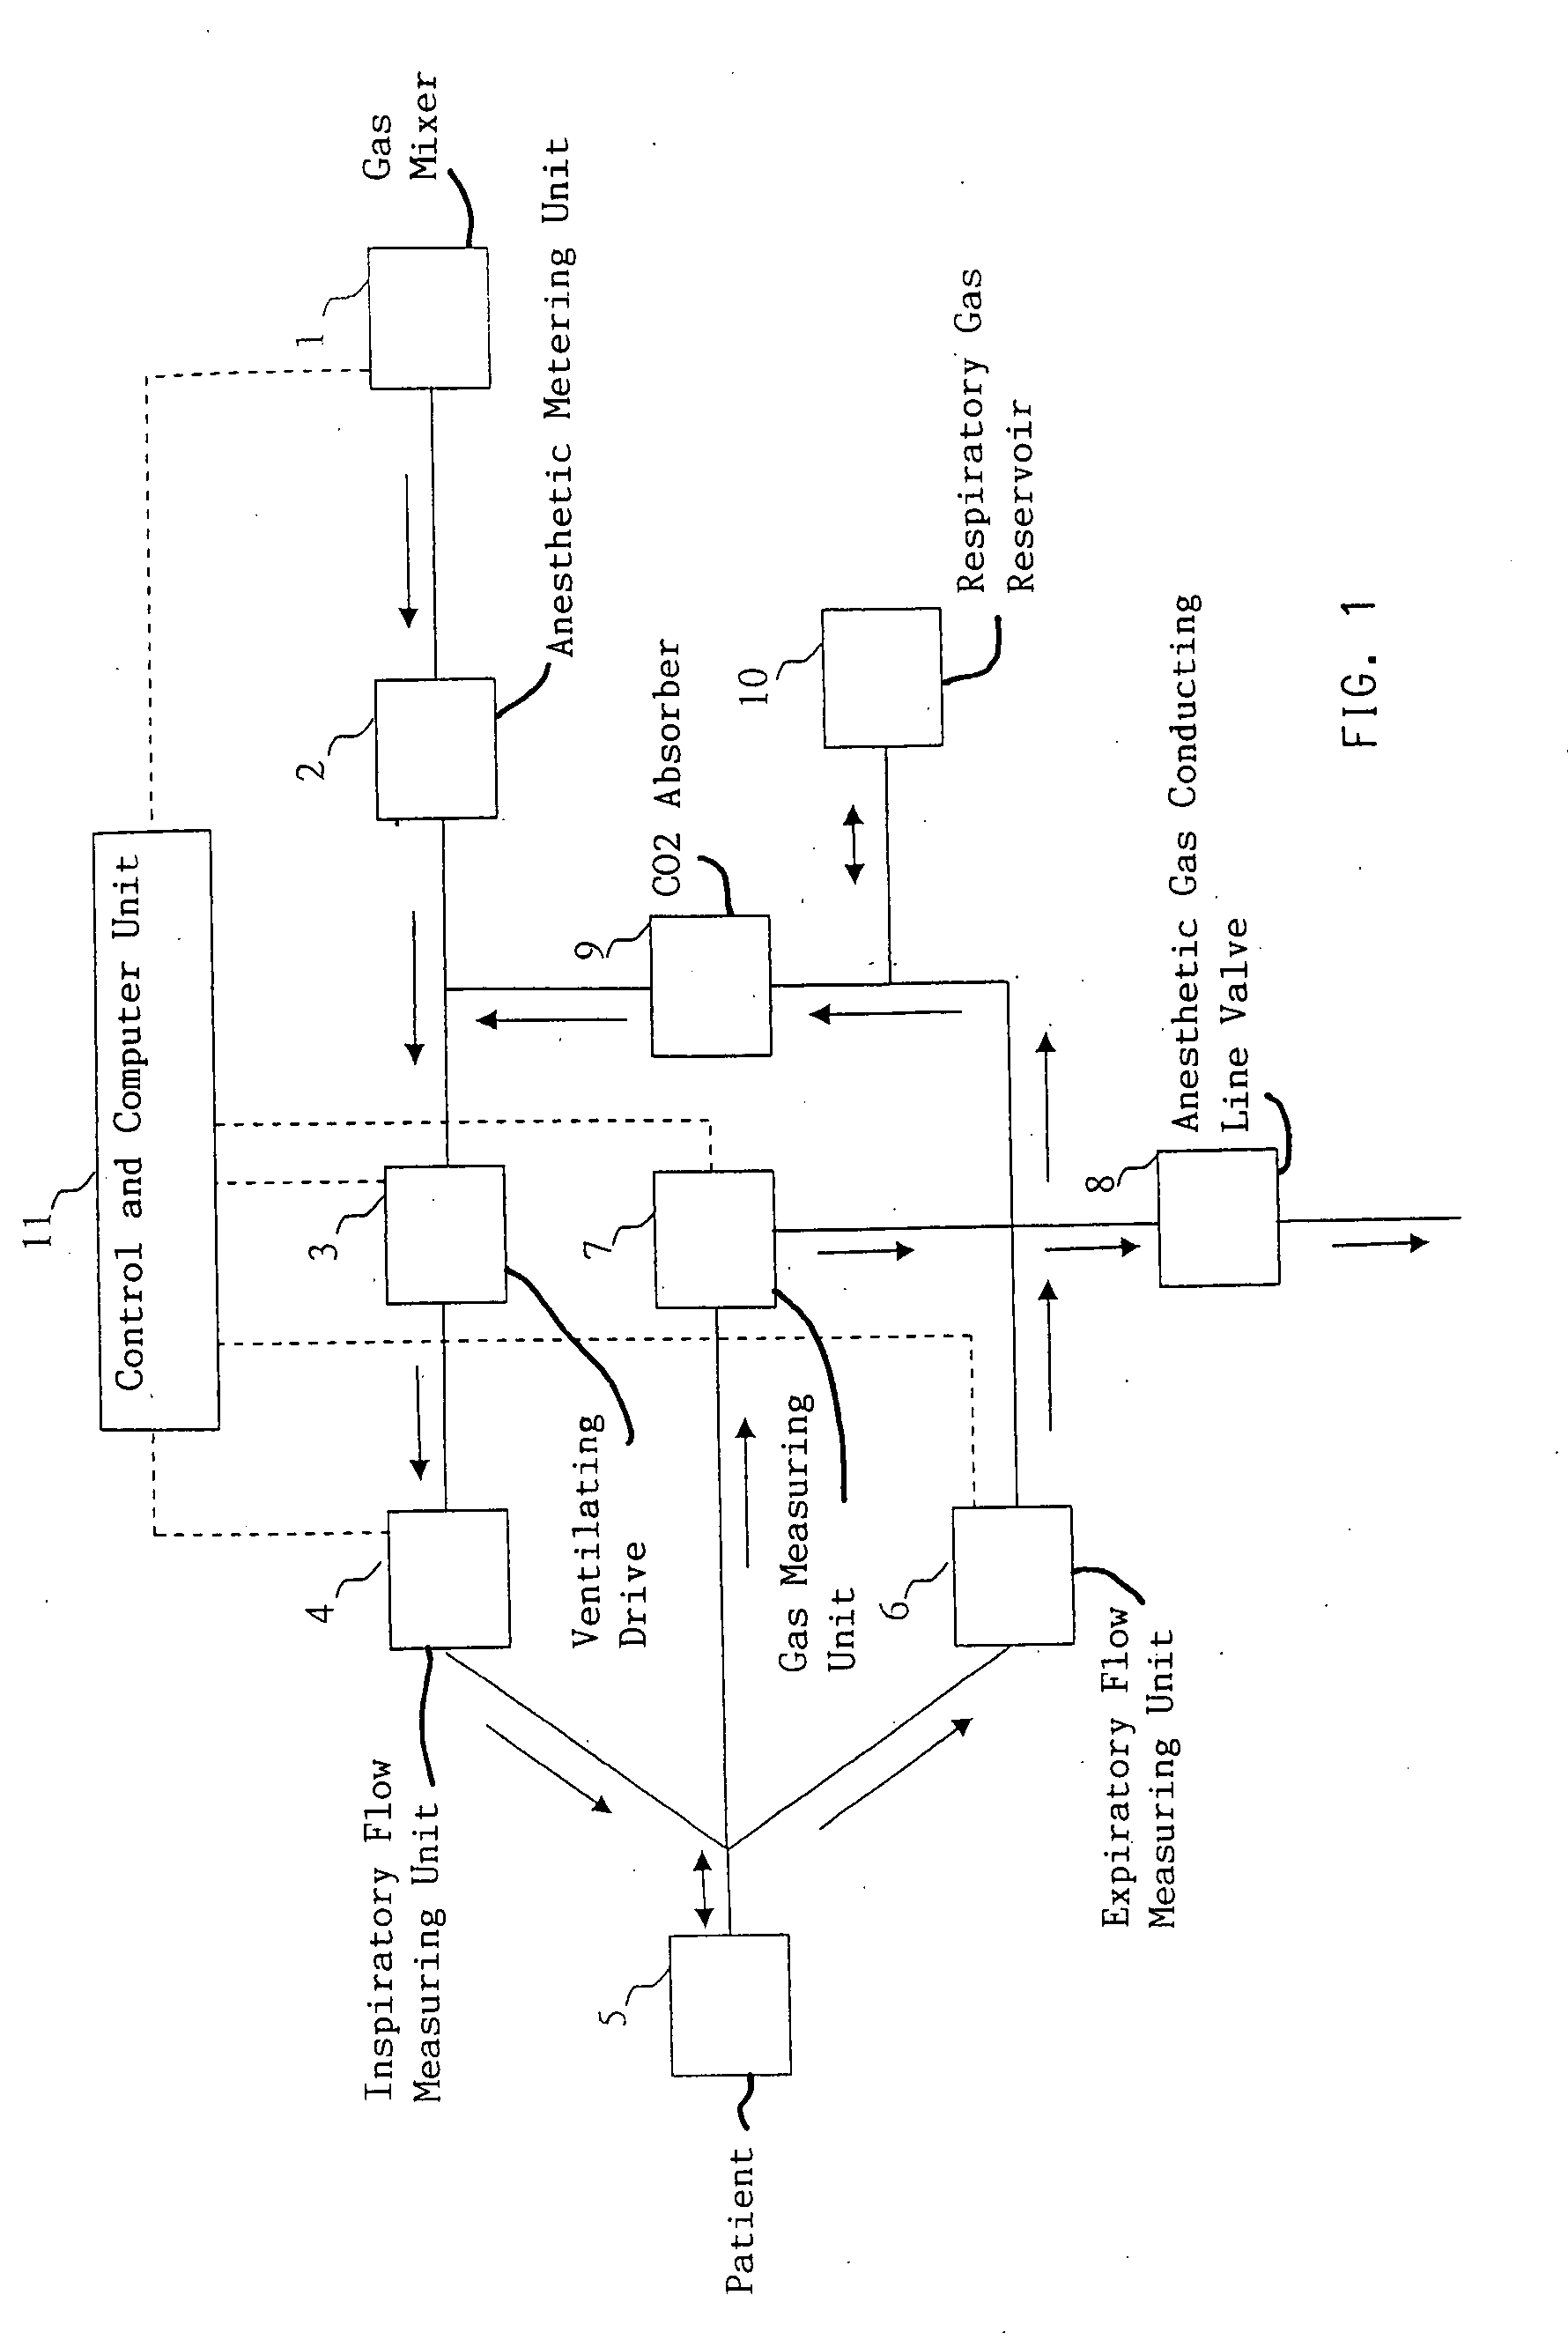 Method for measuring the anesthetic agent consumption in a ventilation system